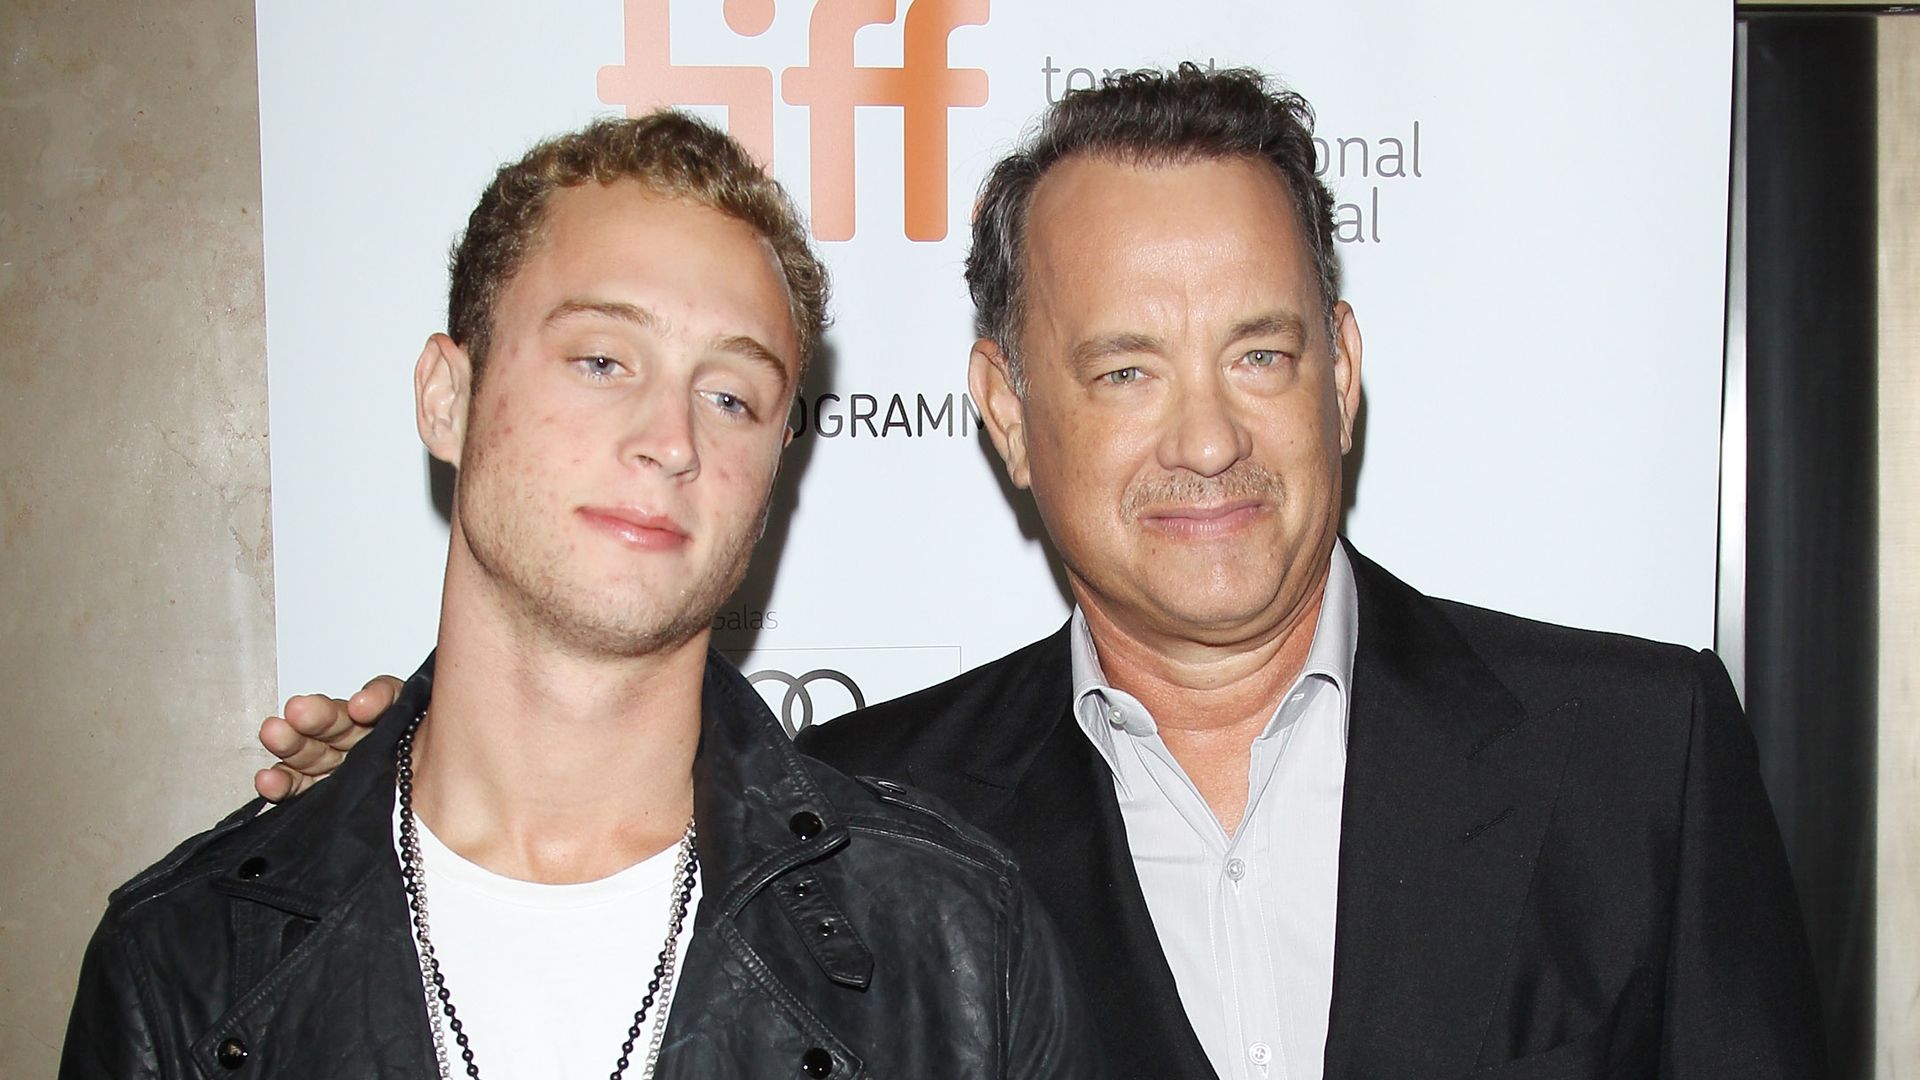 Tom Hanks' son Chet unveils appearance change – see photo